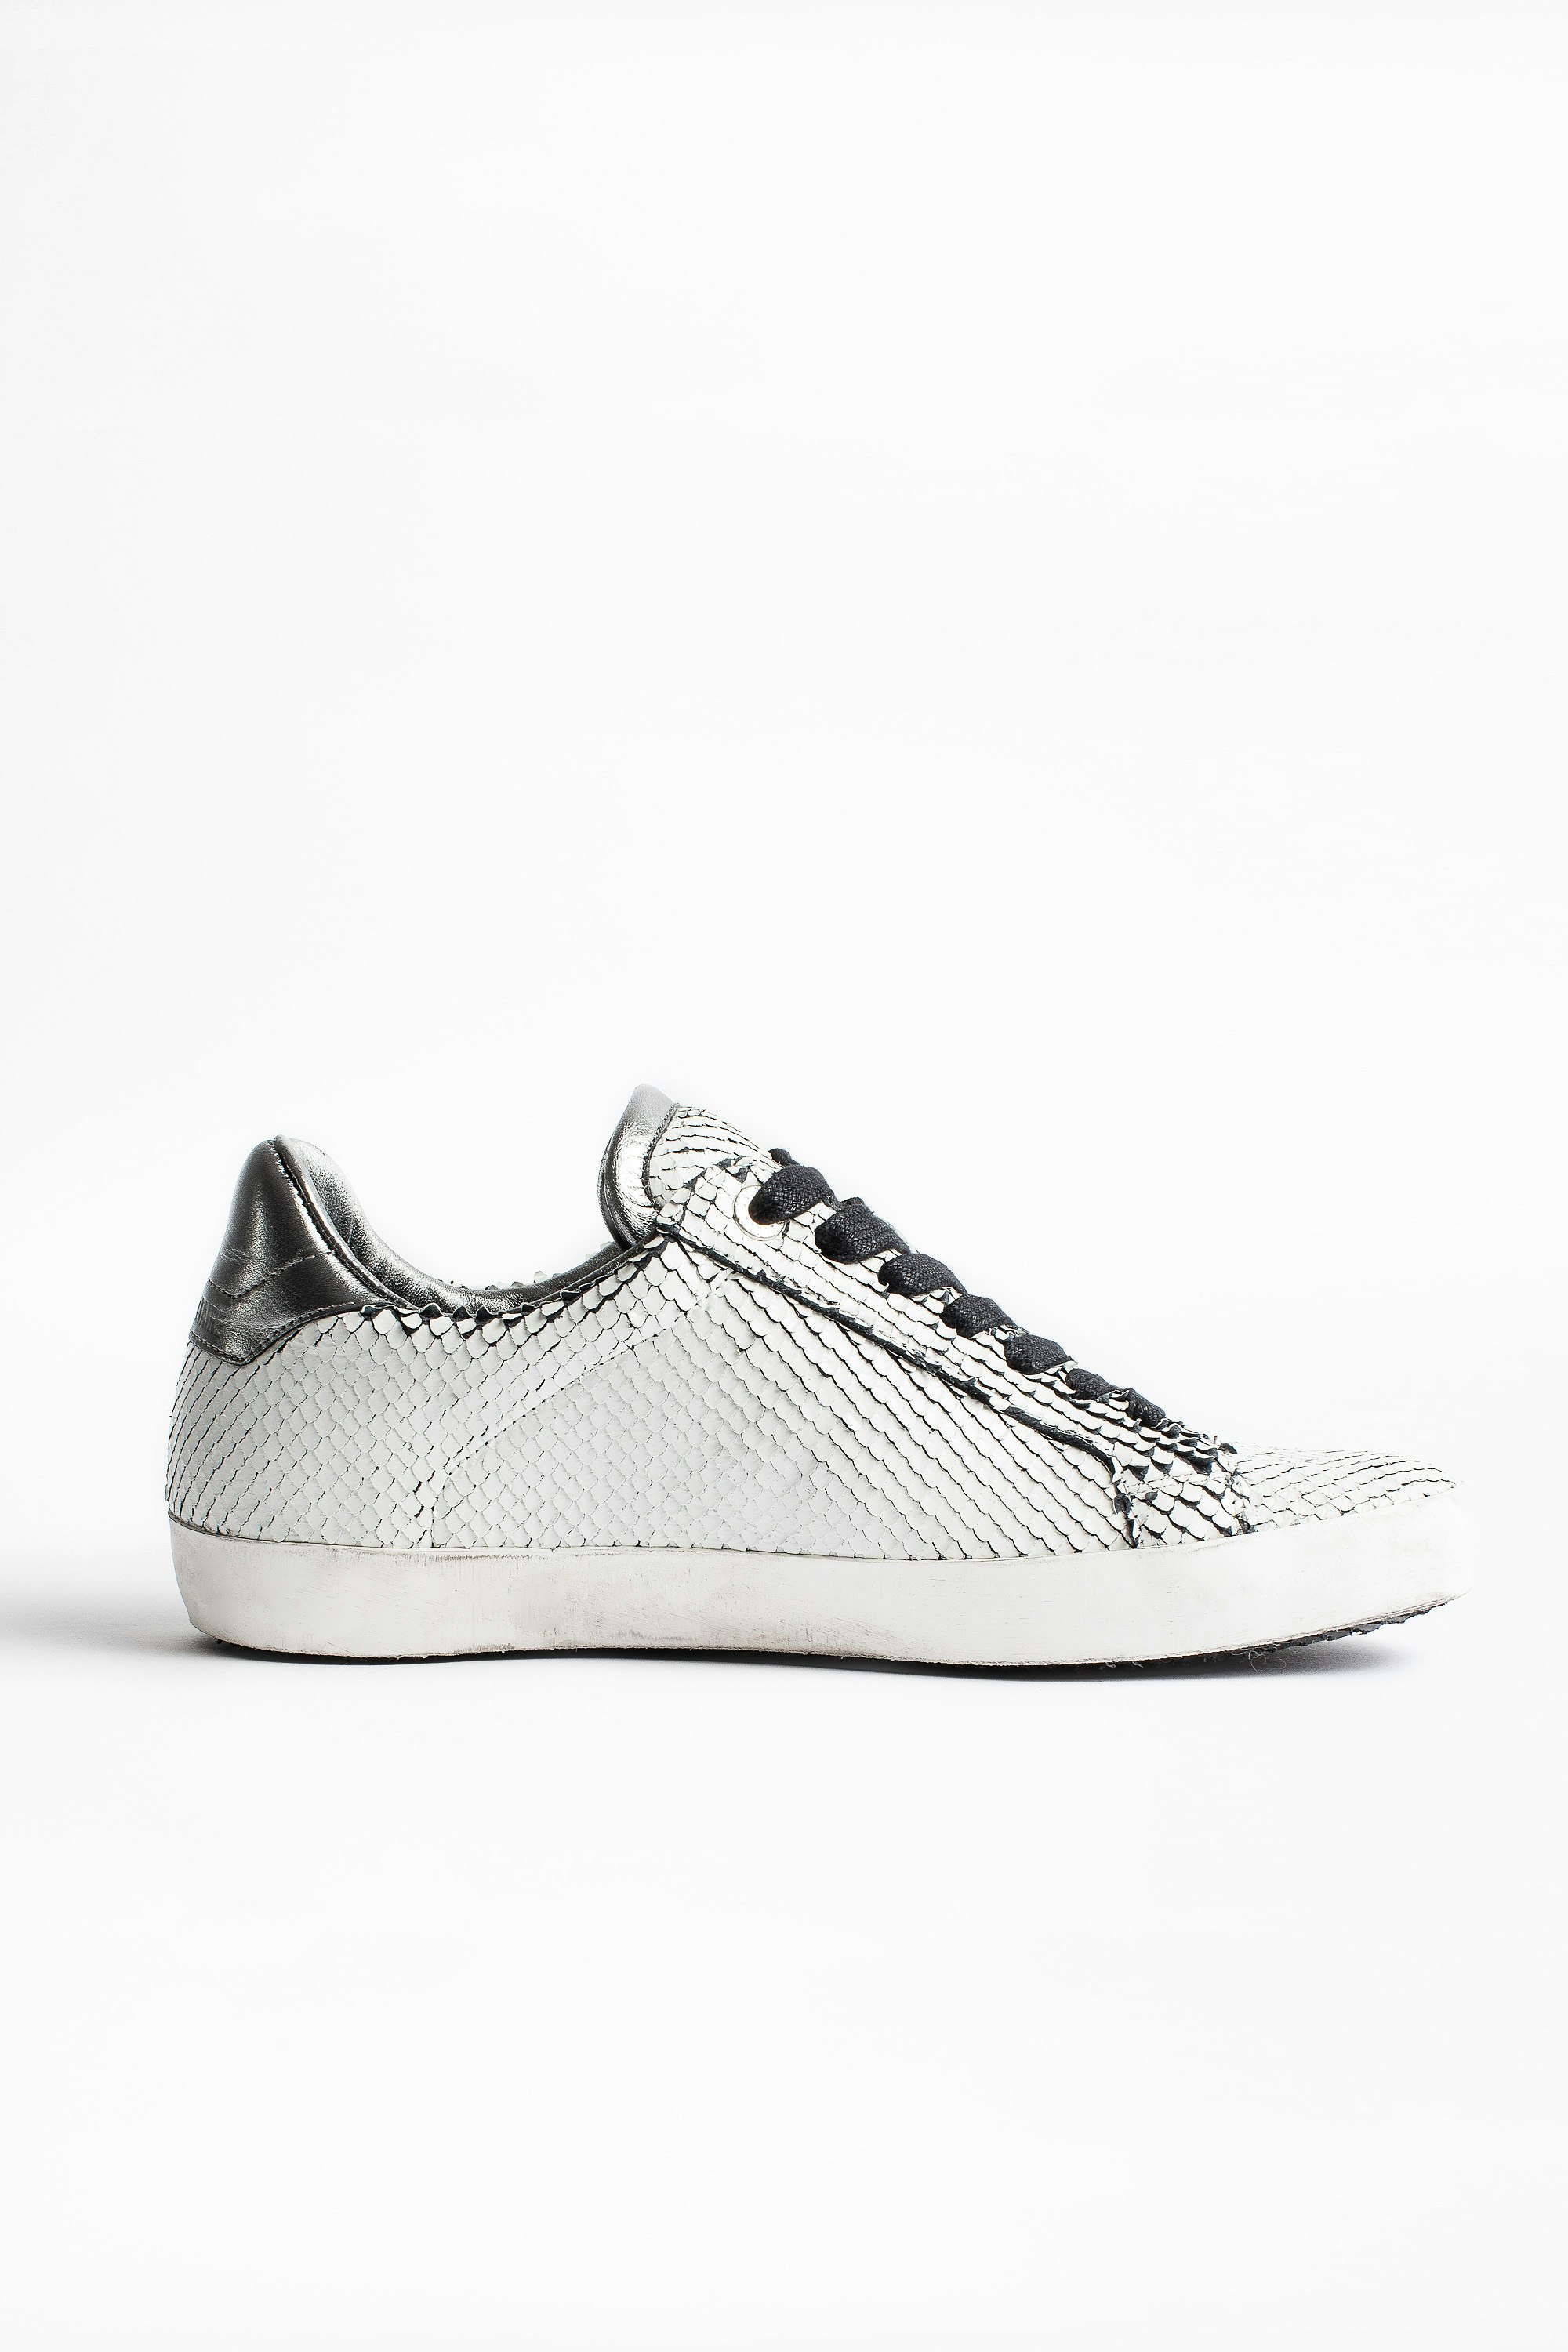 Zadig Neo Keith Flash sneakers - Women’s white leather sneakers.